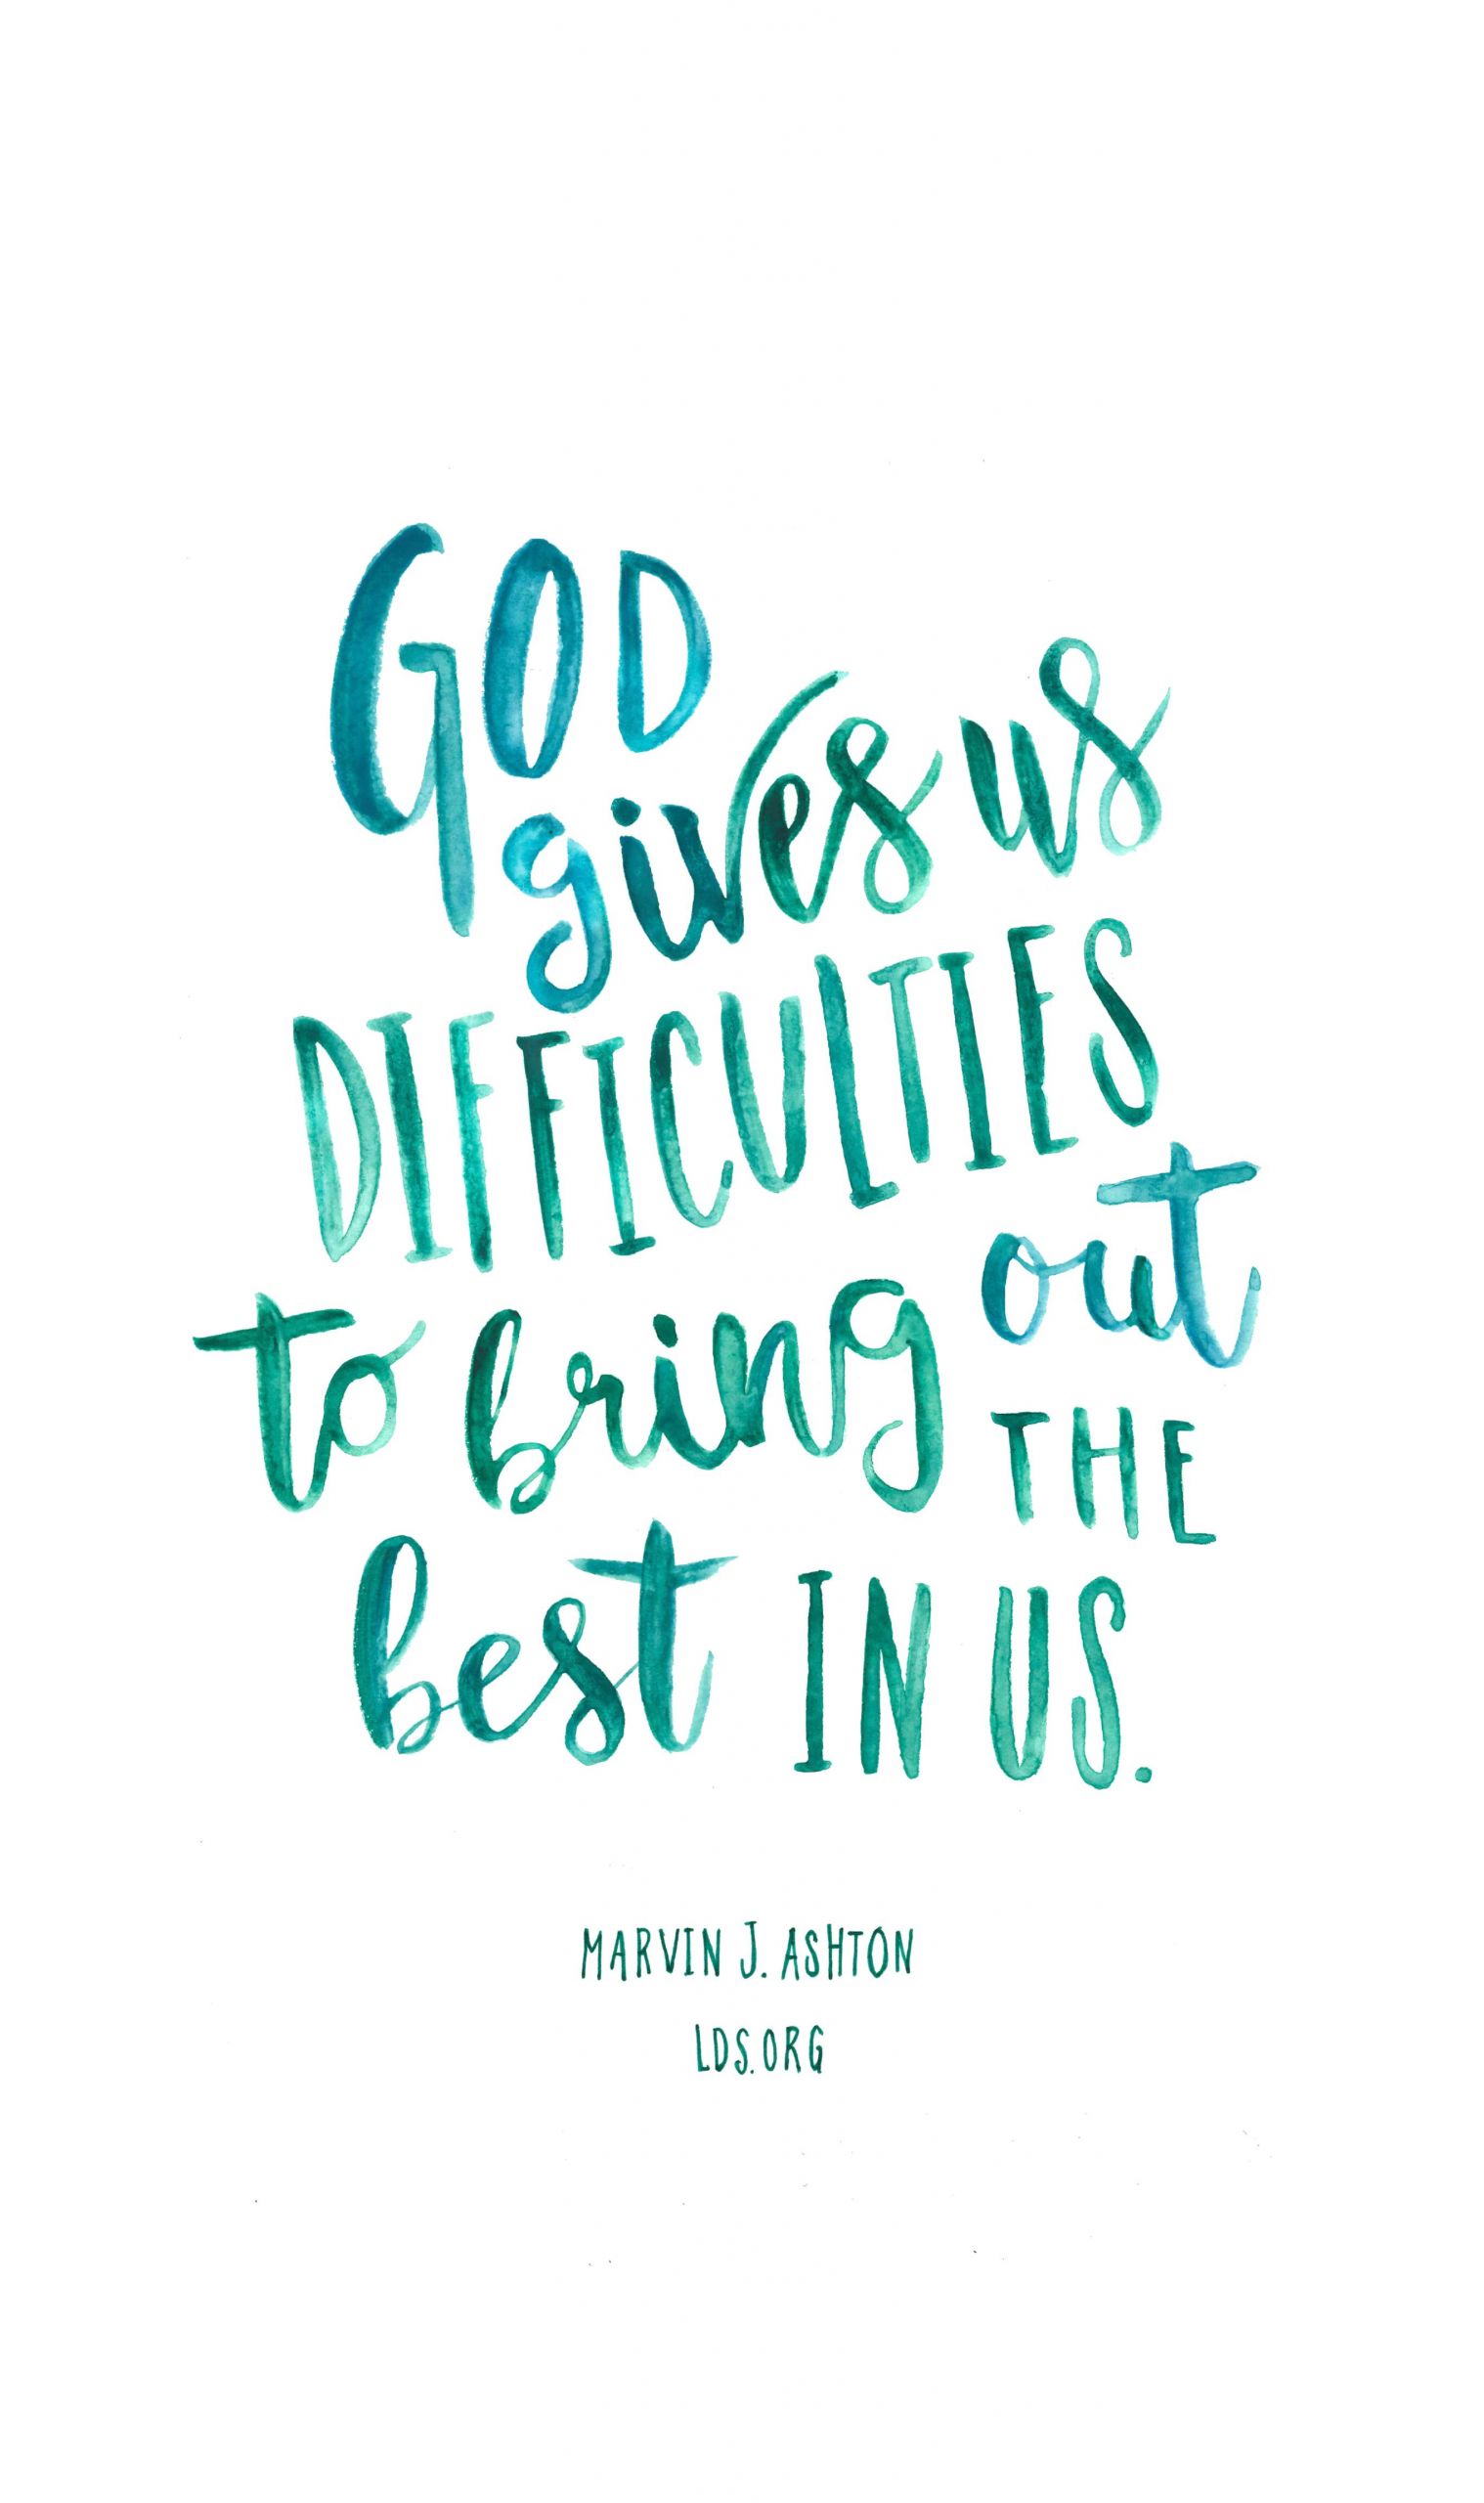 Lds Motivational Quotes
 God gives us difficulties to bring out the best in us